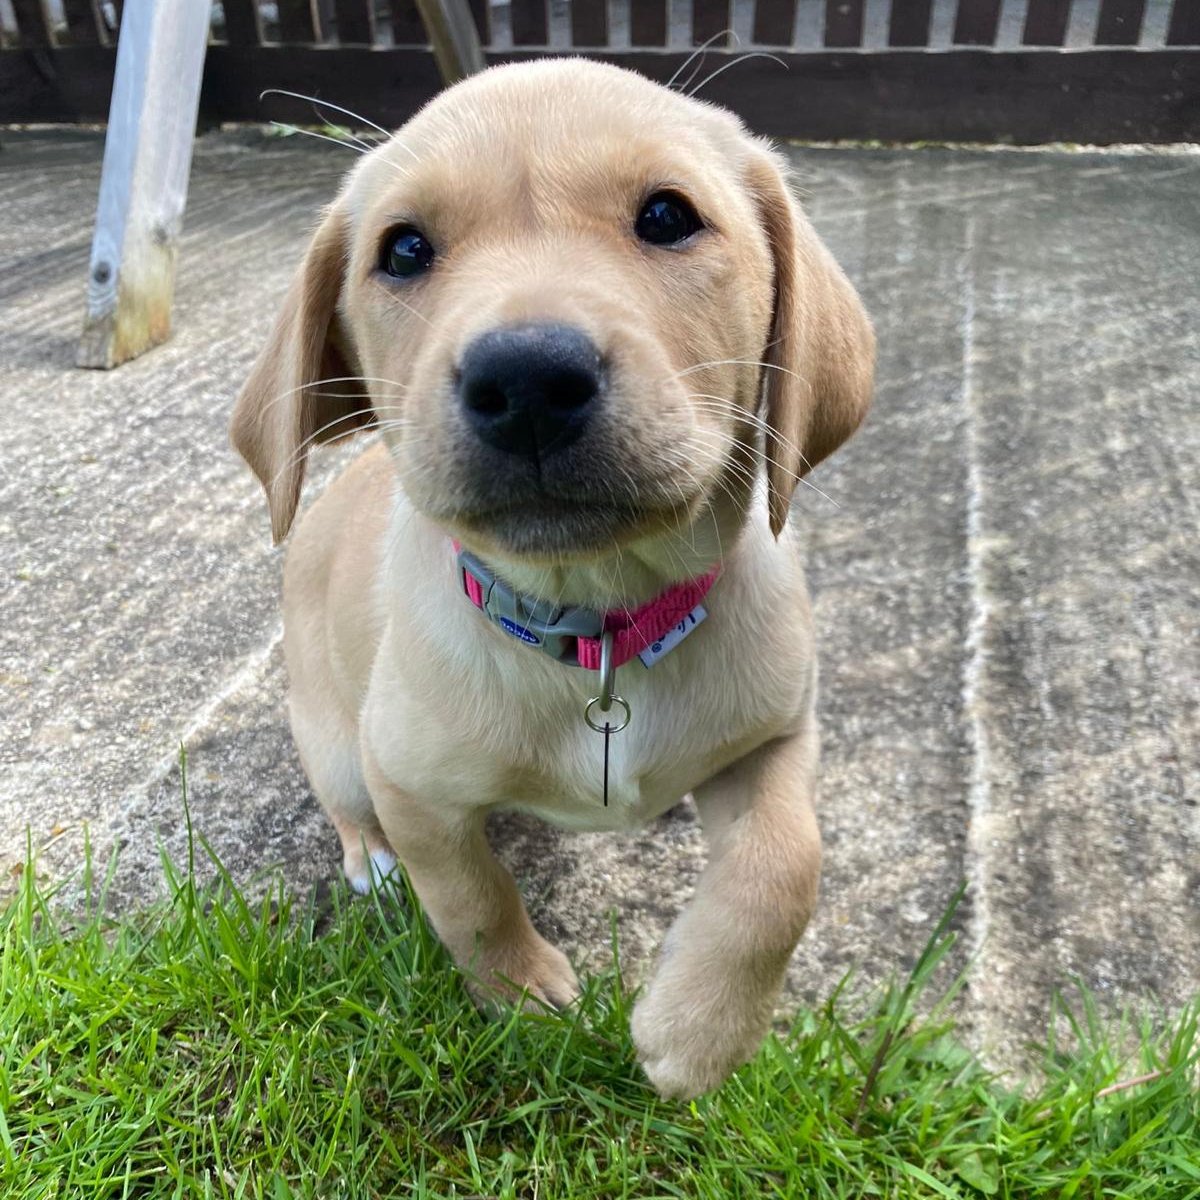 It is our absolute pleasure to introduce you to the adorable Ruby 🥰🐶

Ruby is at the start of her training and first up for our lovely Labrador is learning her basic cues like 'sit' and 'wait', and investigating lots of new sights, sounds and smells.

Have lots of fun Ruby! 😆